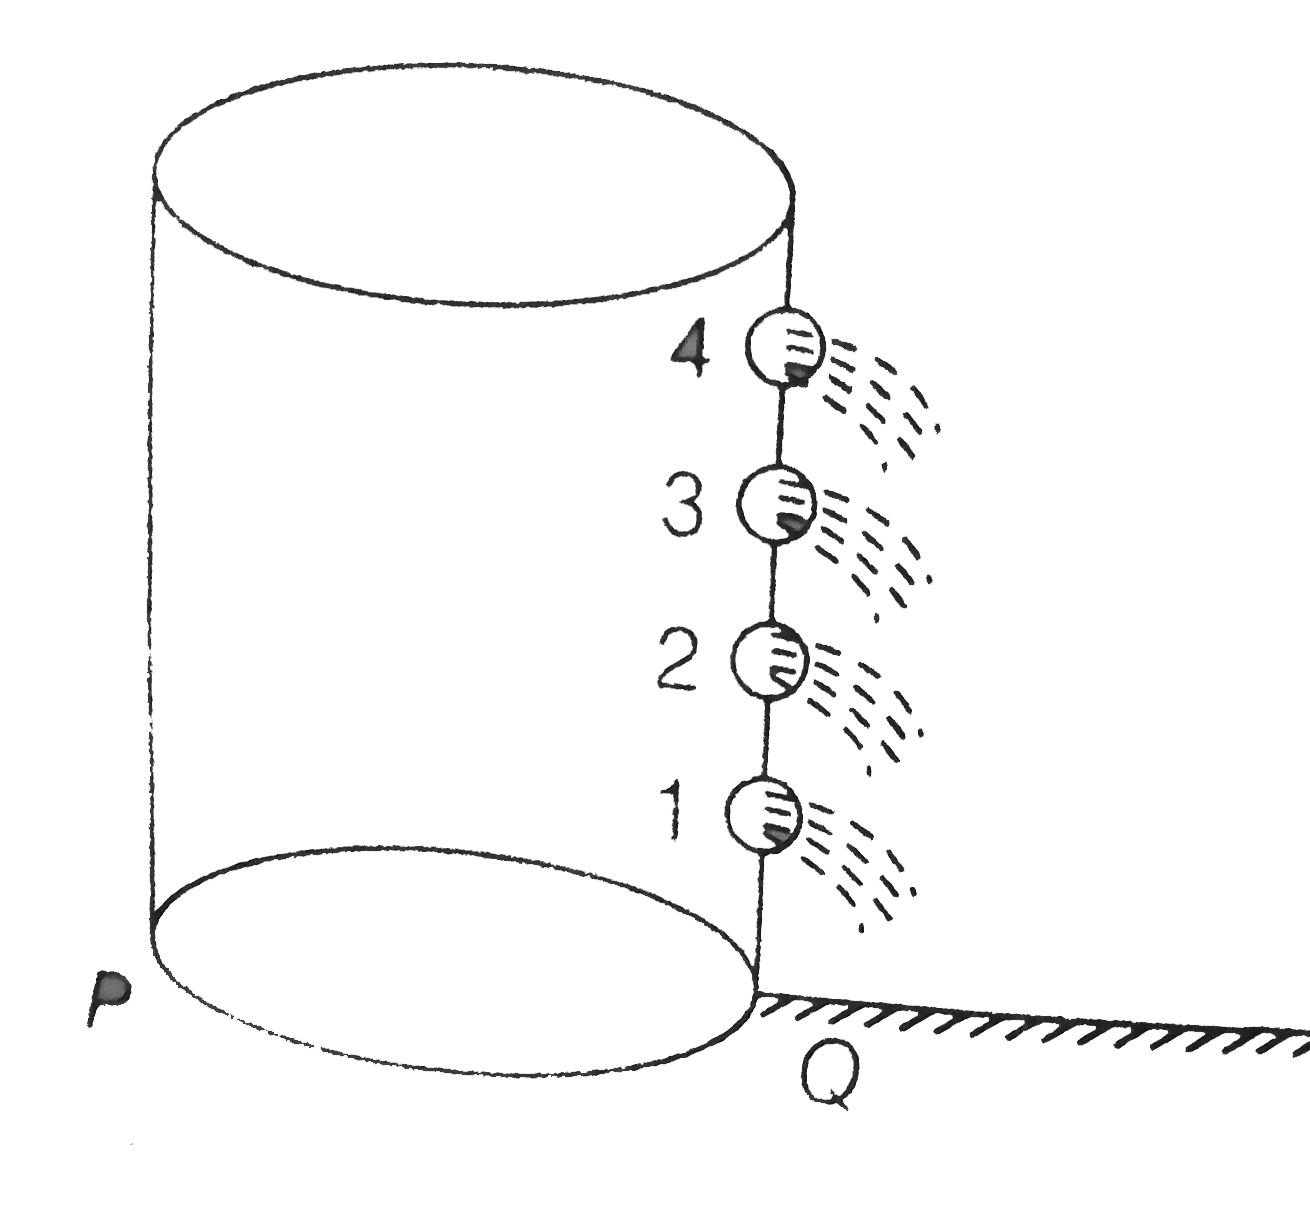 A cylindrical vessel of 90 cm height is kept filled with water upto the rim. It has four holes 1,2,3,4 which are respectively at heights of 20 cm 45 cm and 50 cm from the horizontal floor PQ. Through which of the holes water is falling at the maximum horizontal distance ?